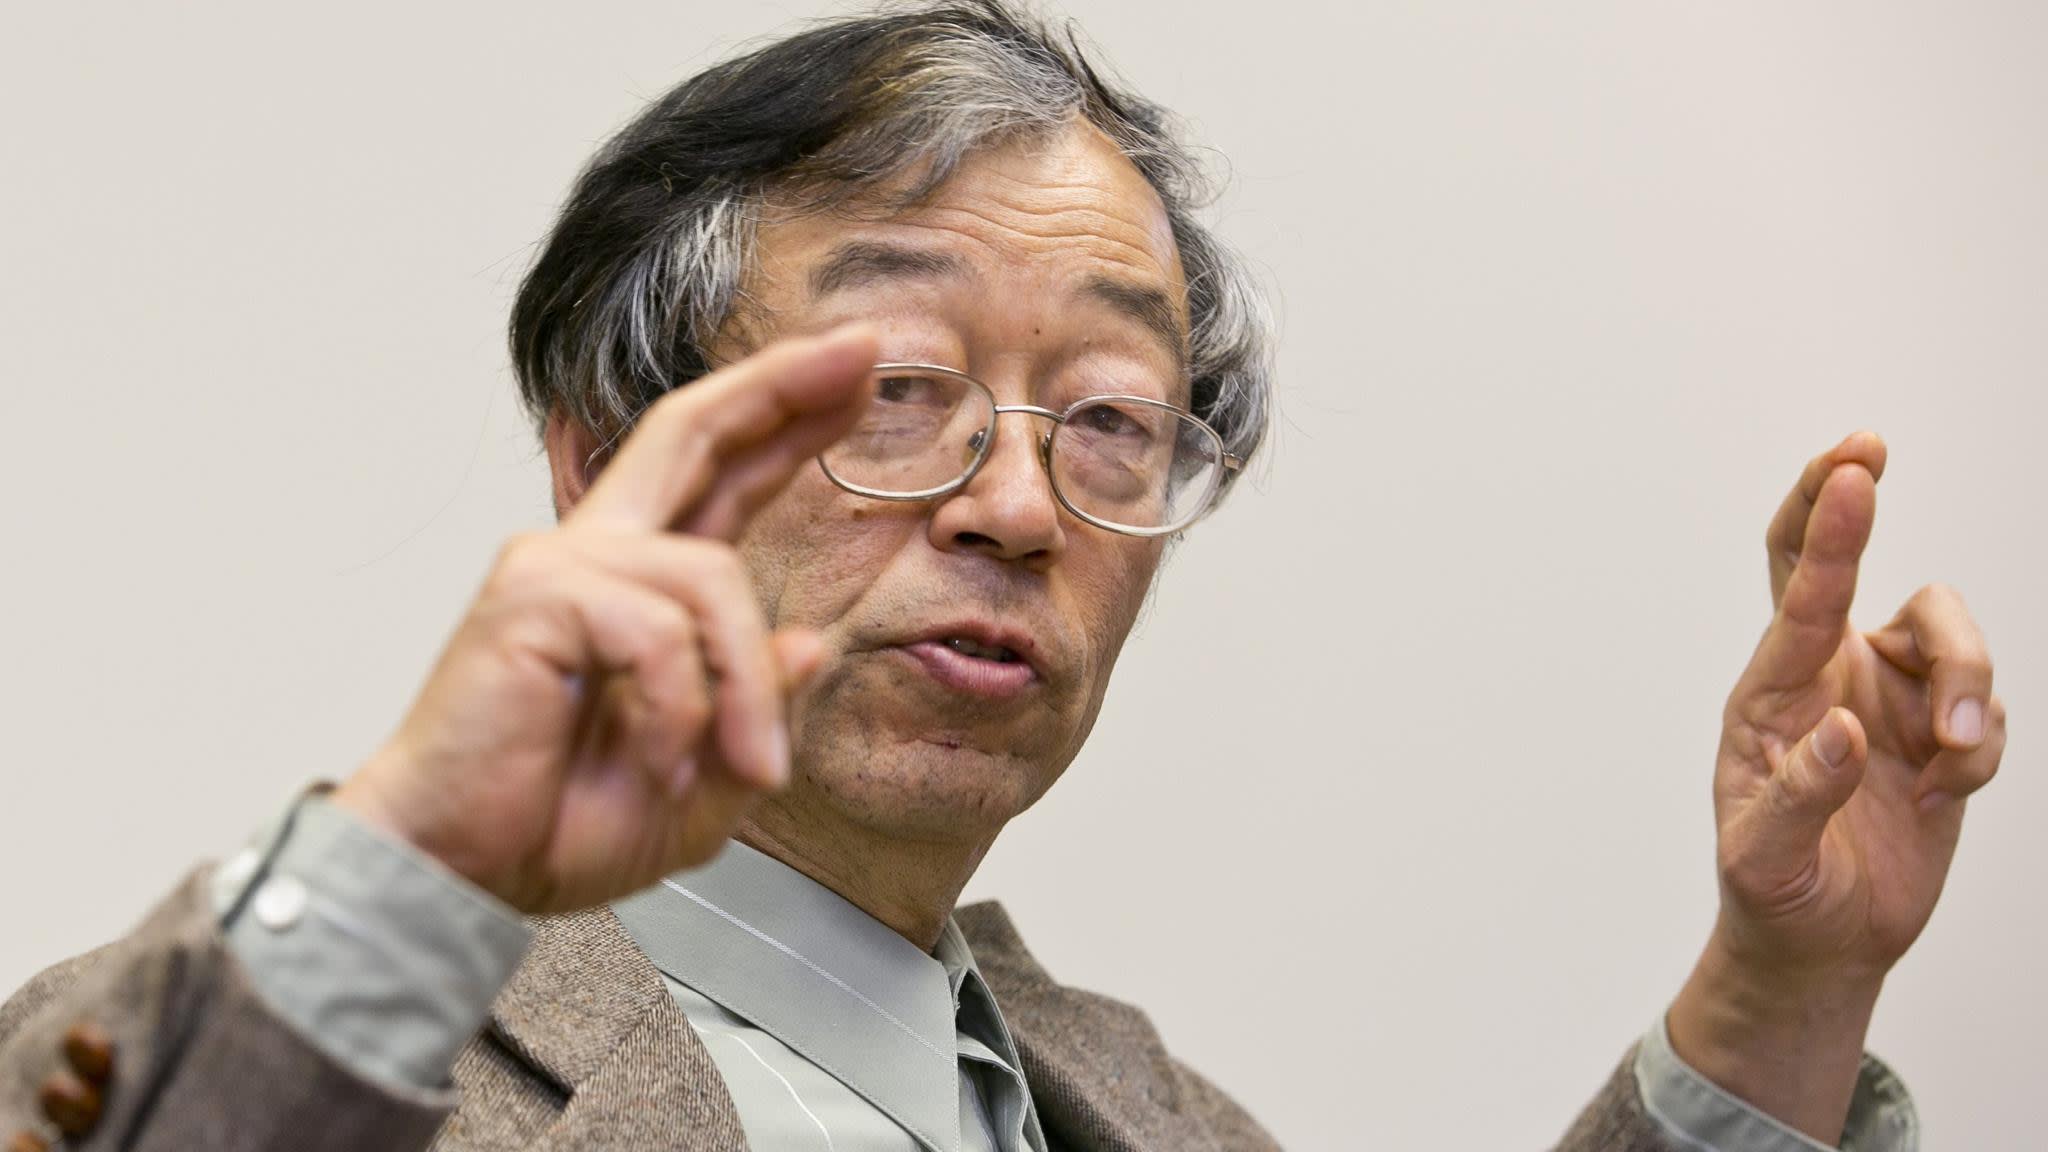 Bitcoin From Satoshi Nakamoto's Era Were Moved as BTC Prices Hit $44,